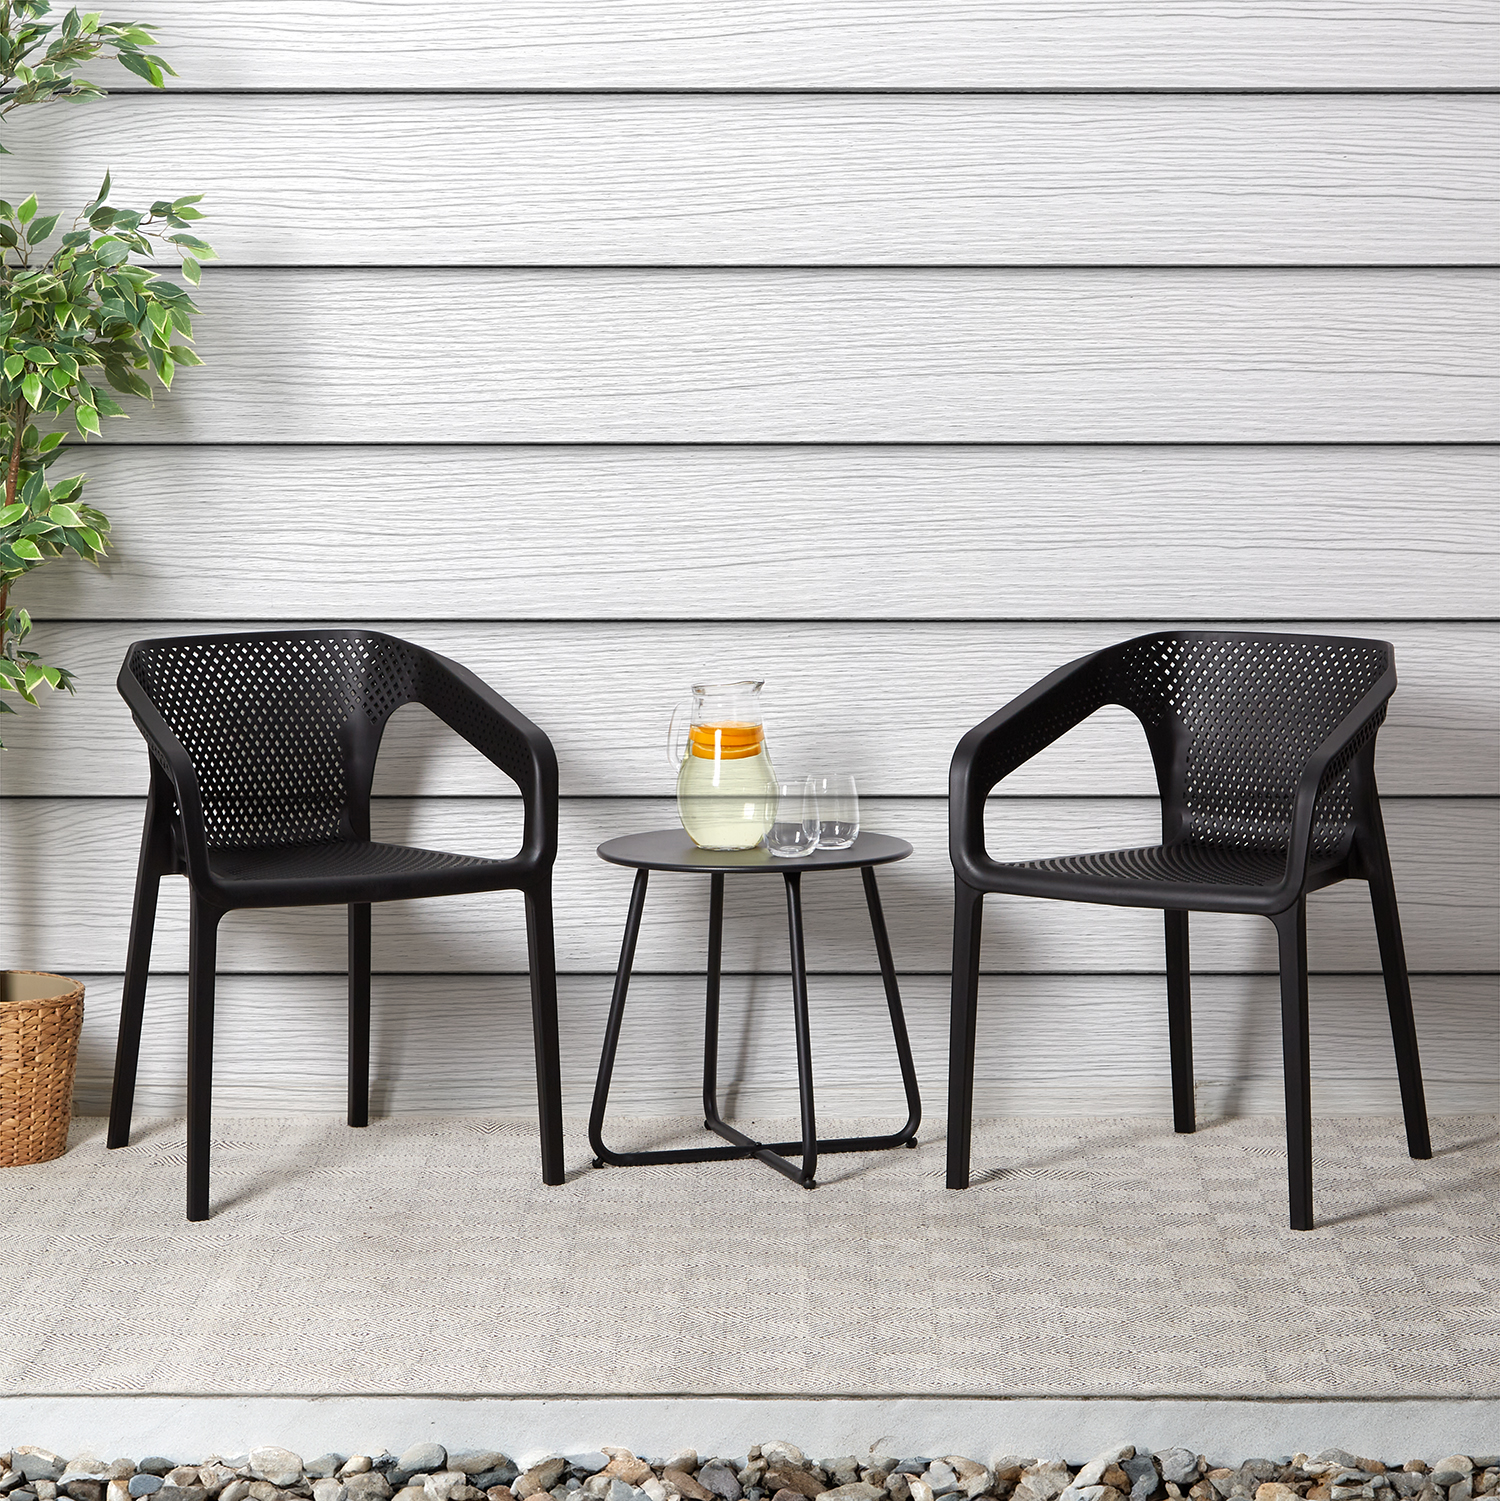 Garden furniture set Garden table and 2 chairs Bistro set Black Outdoor table and chairs Lounge chair Patio set